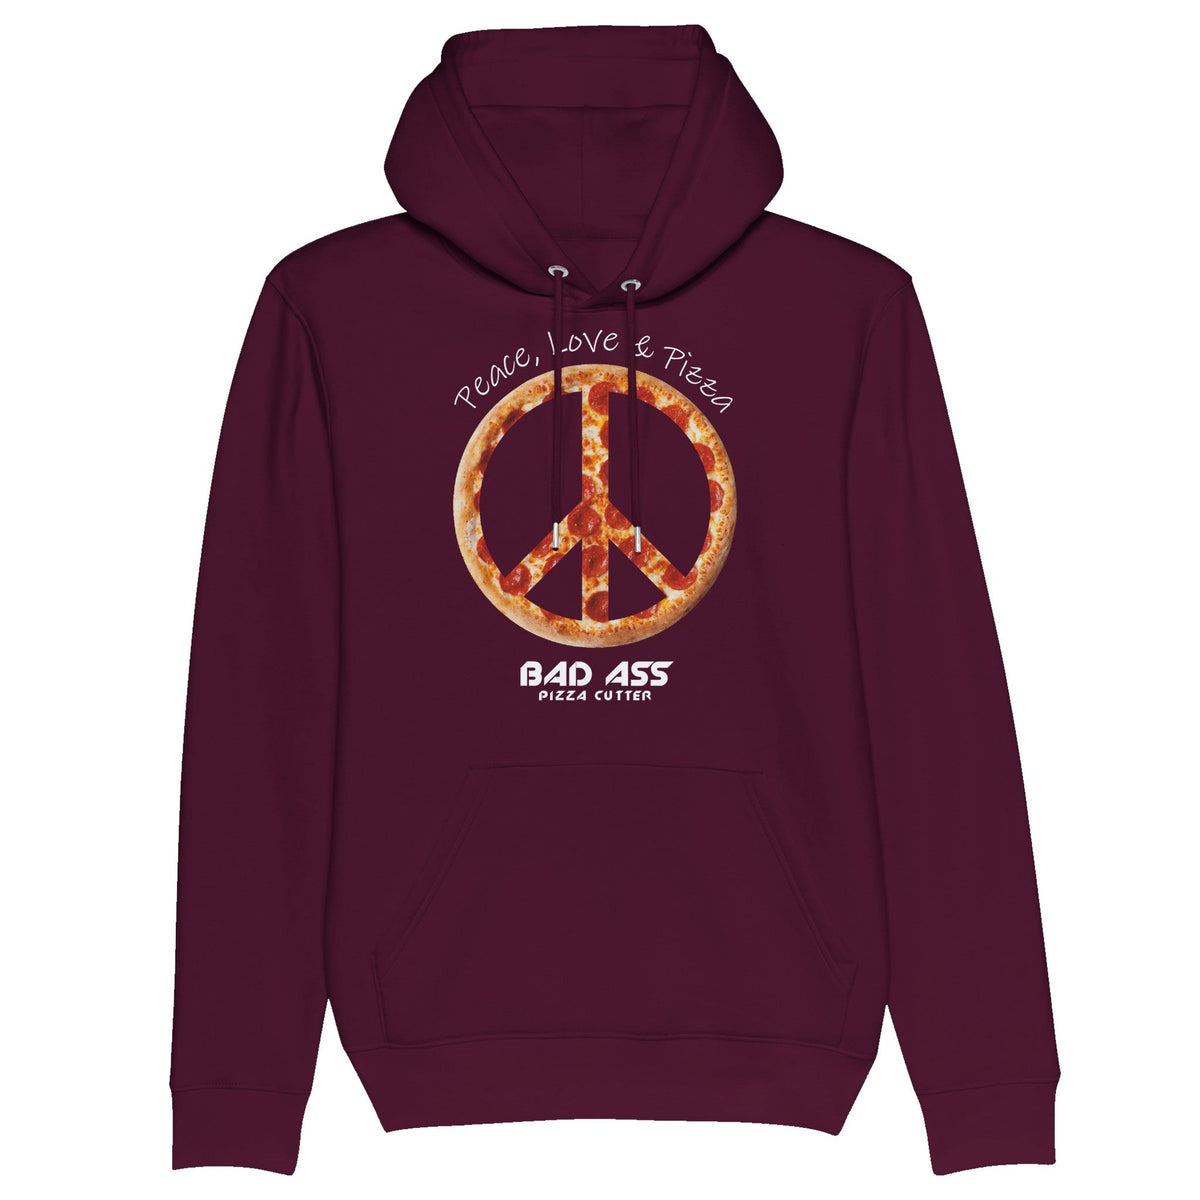 Peace, Love & Pizza Pullover Hoodie - BAD ASS Pizza Cutter